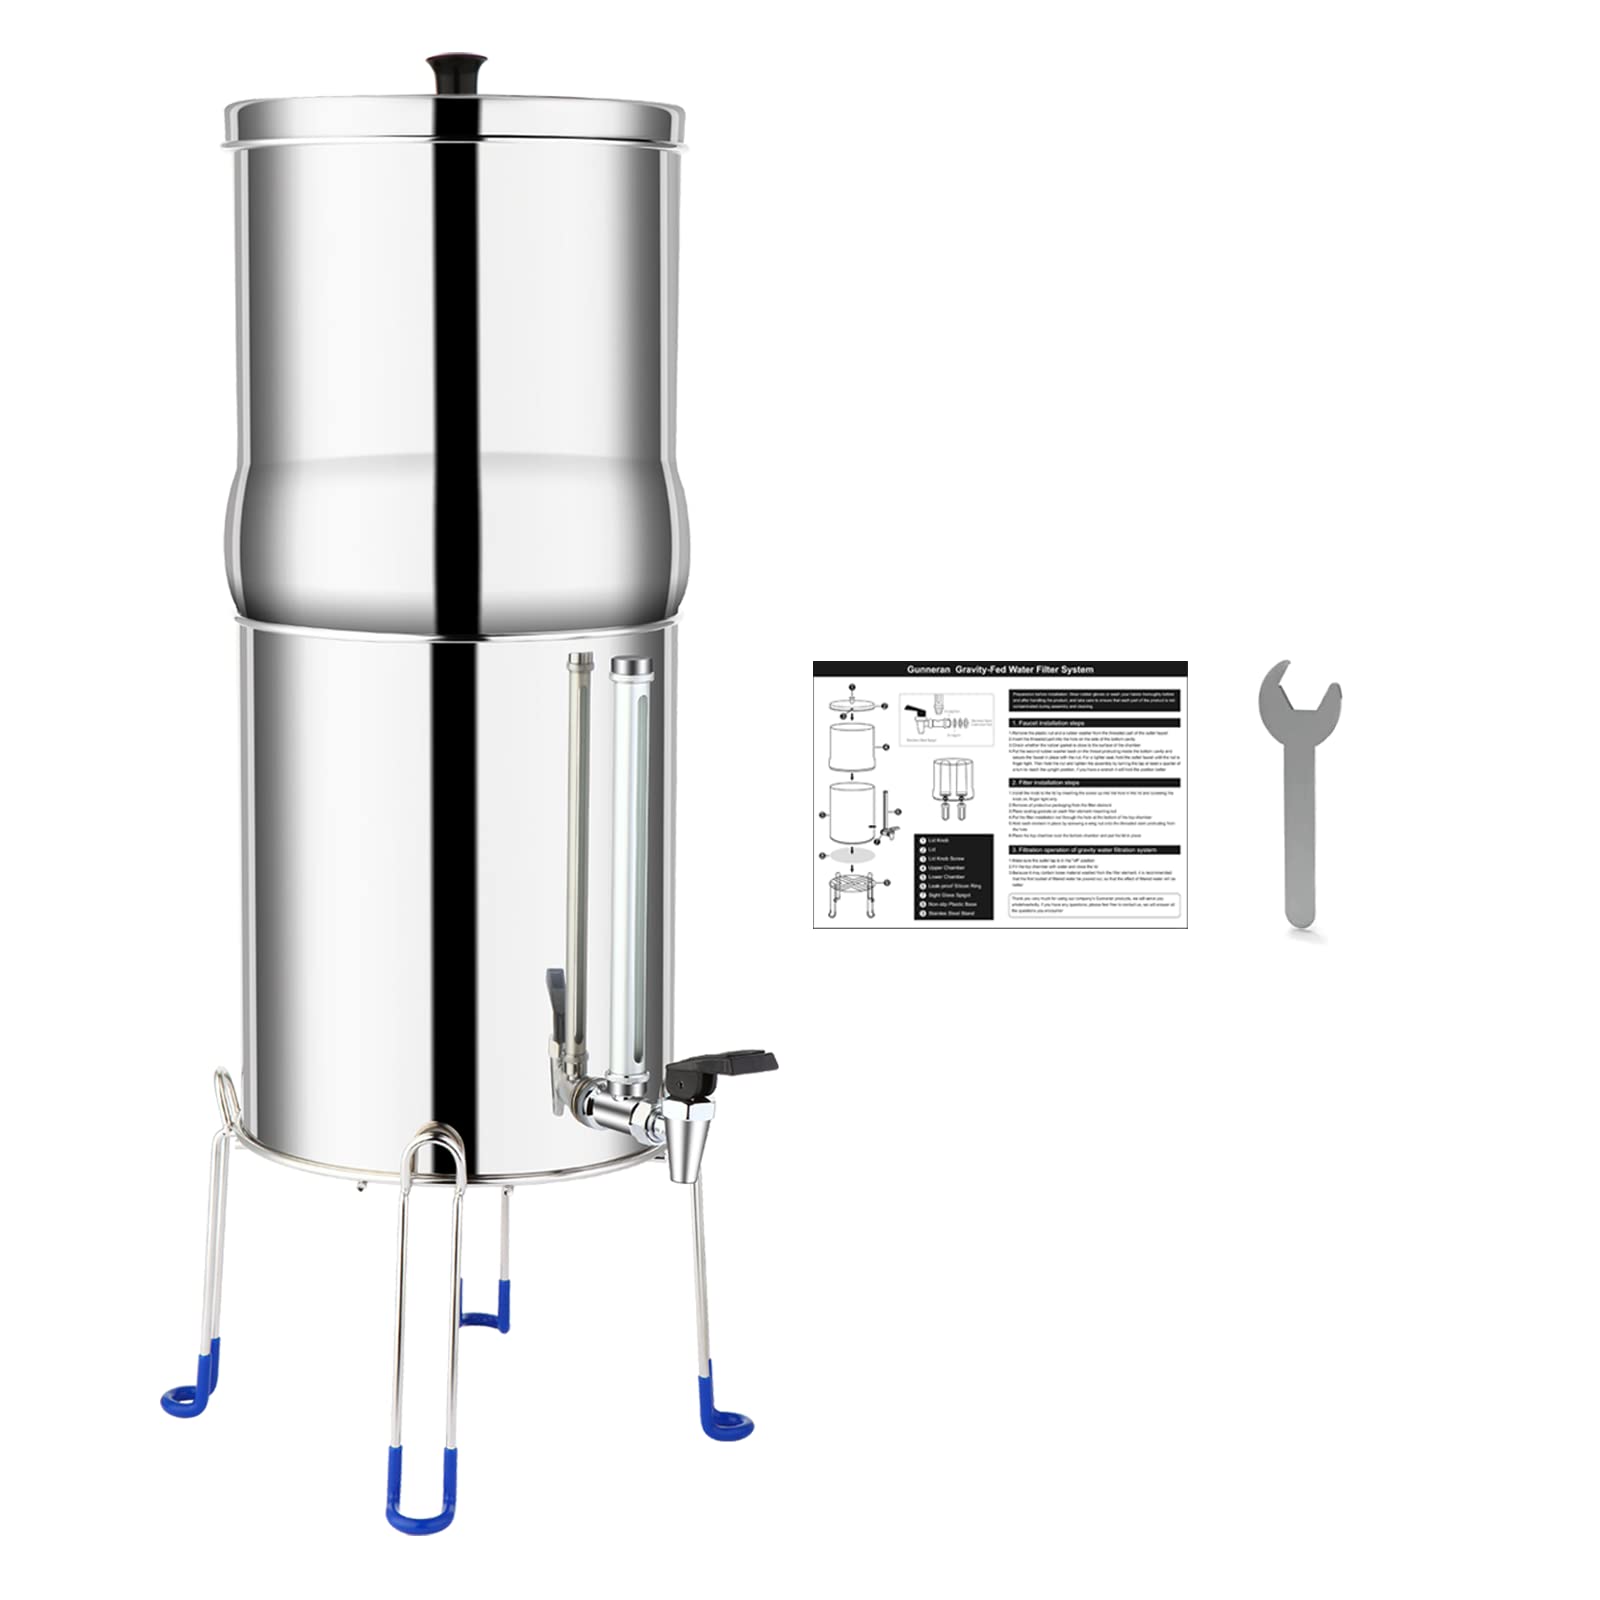 Best Stainless Steel Water Filter
